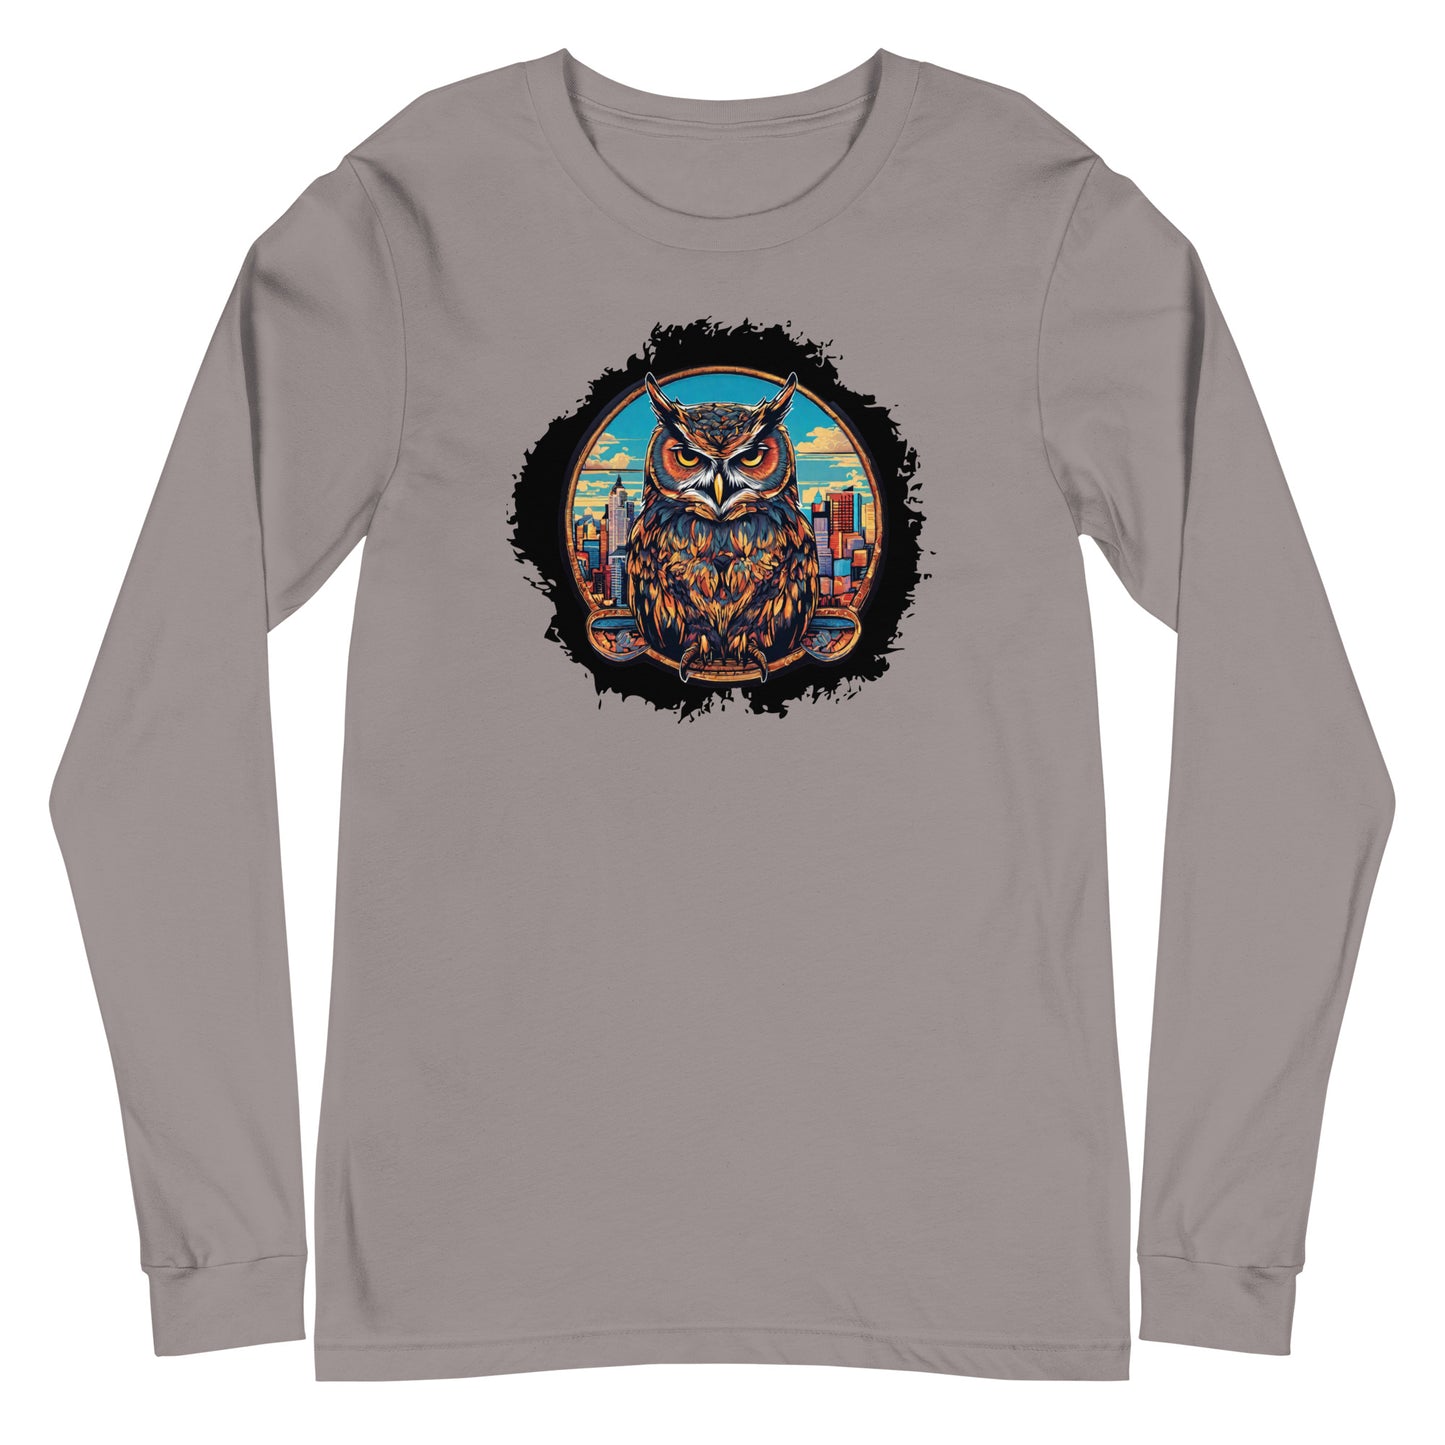 Owl in the City Emblem Long Sleeve Tee Storm